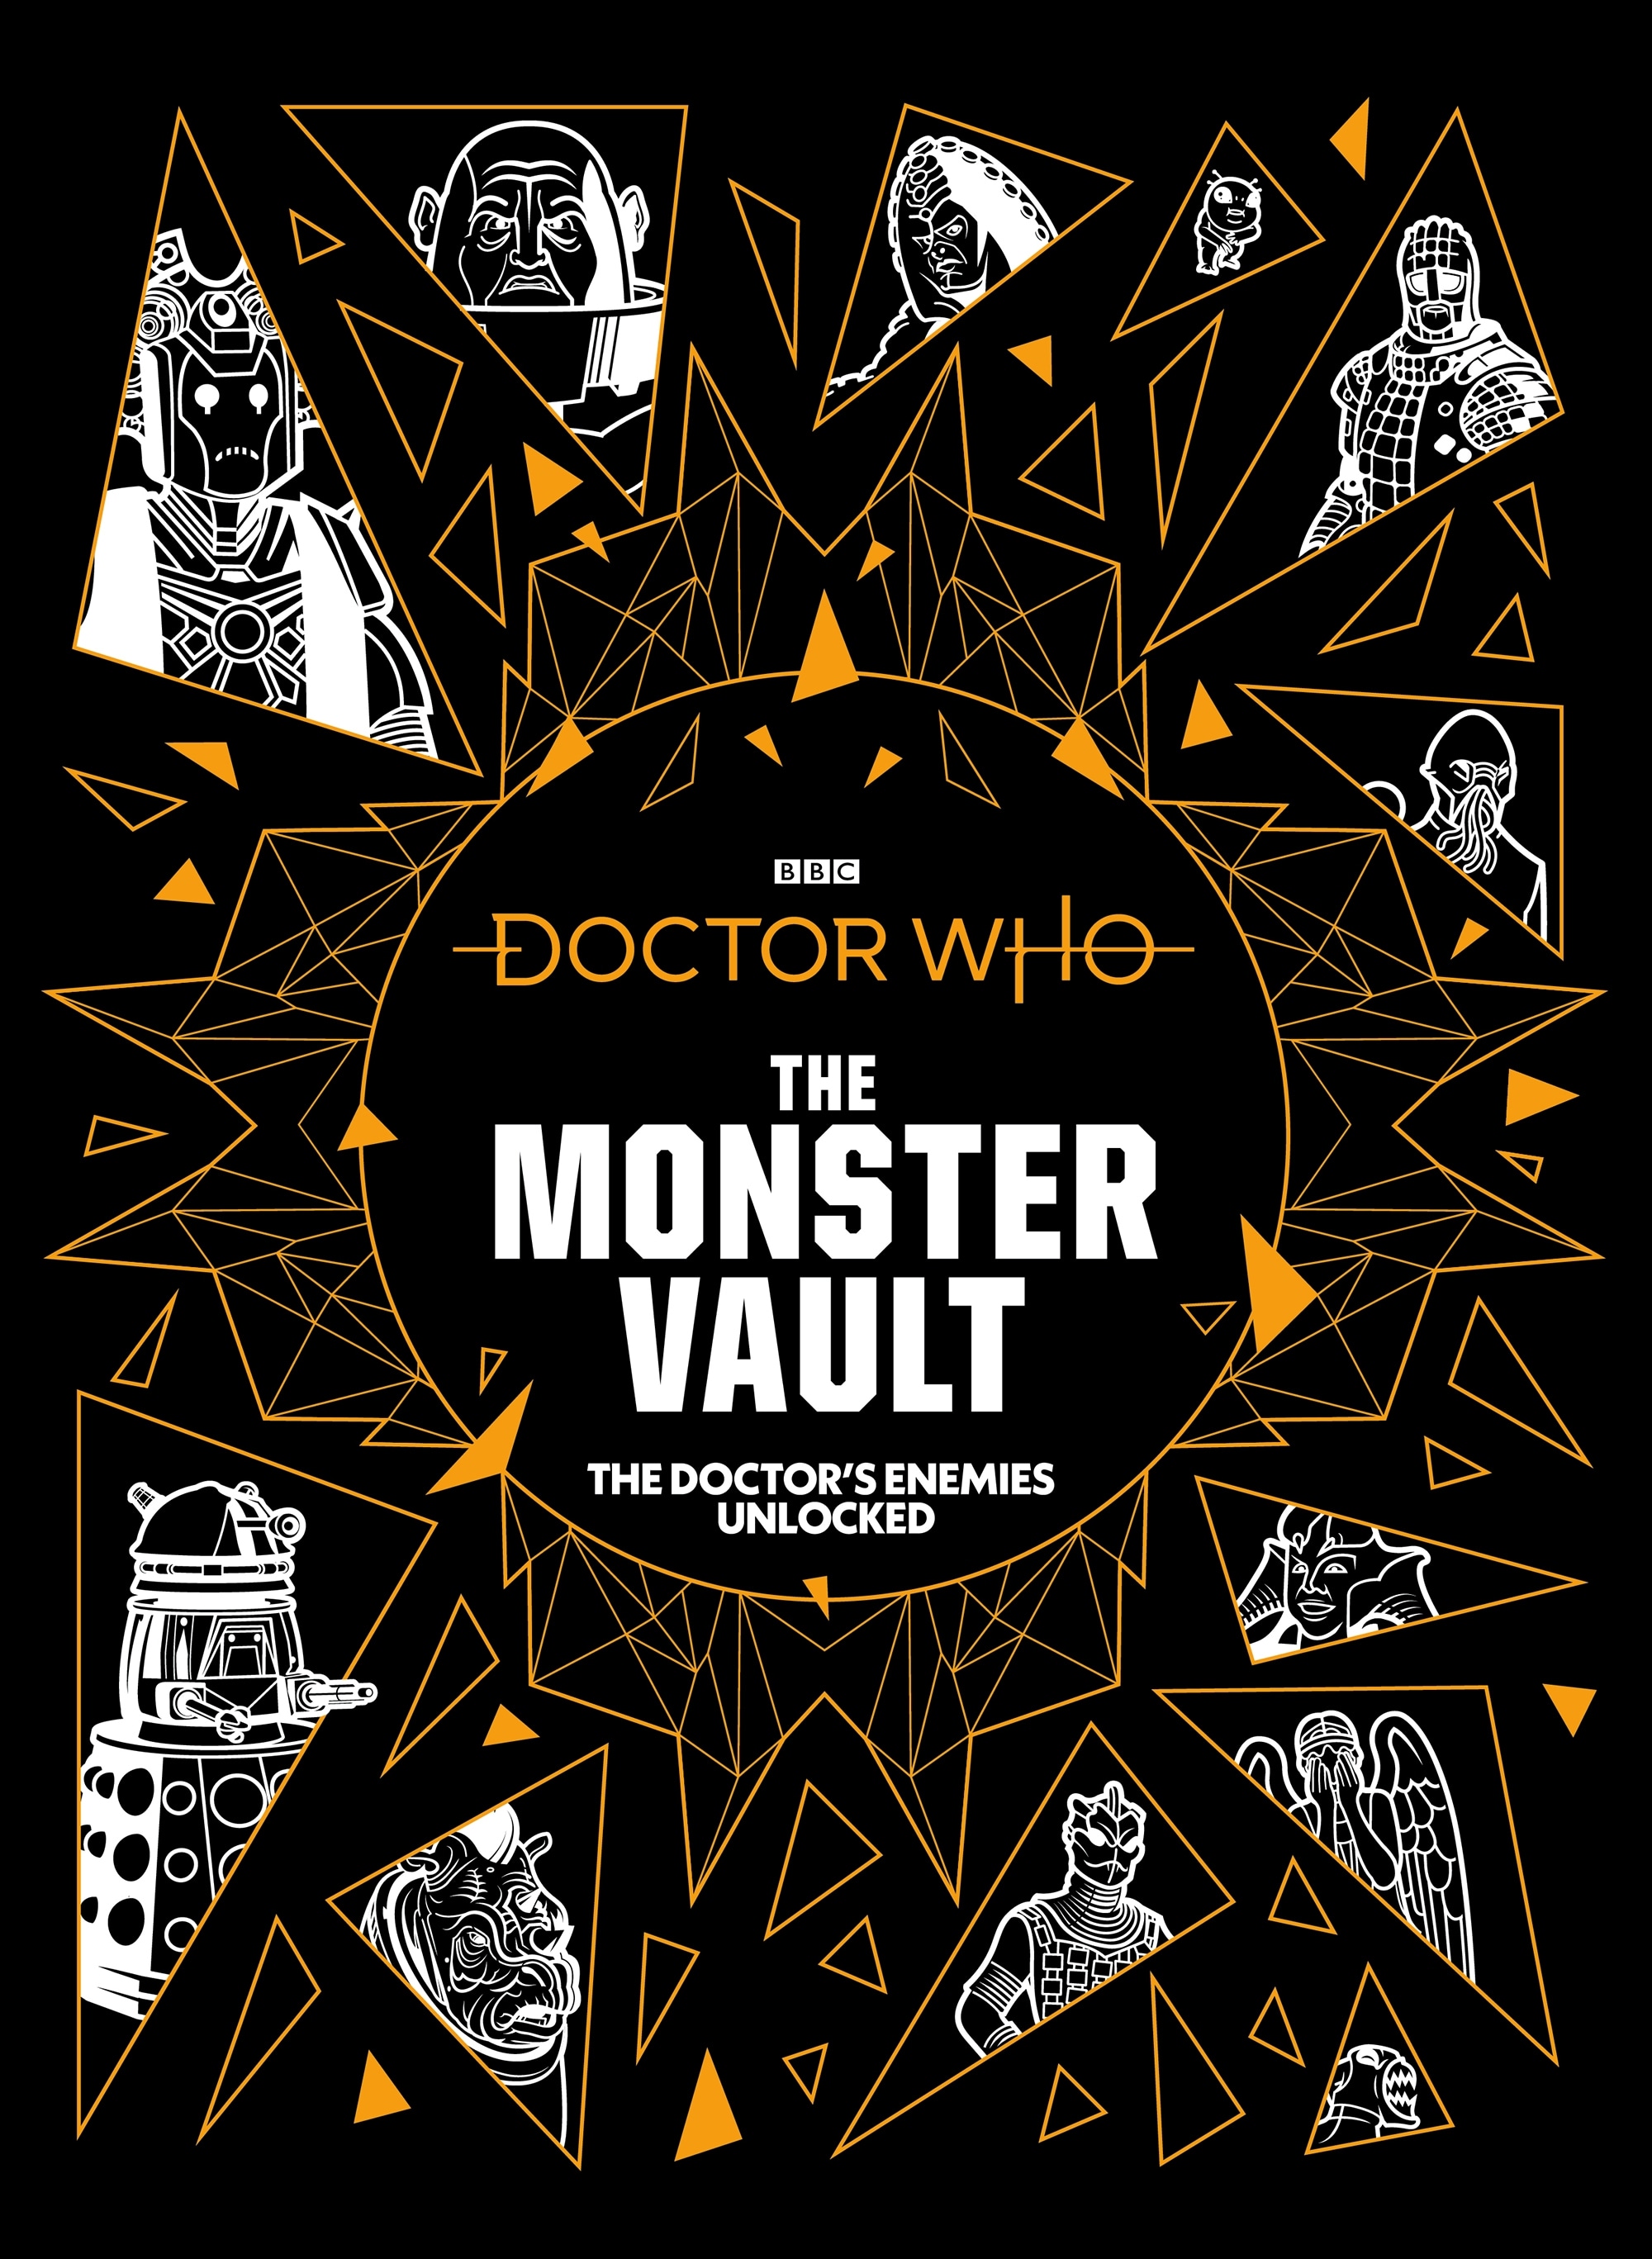 Book “Doctor Who: The Monster Vault” by Jonathan Morris — October 22, 2020